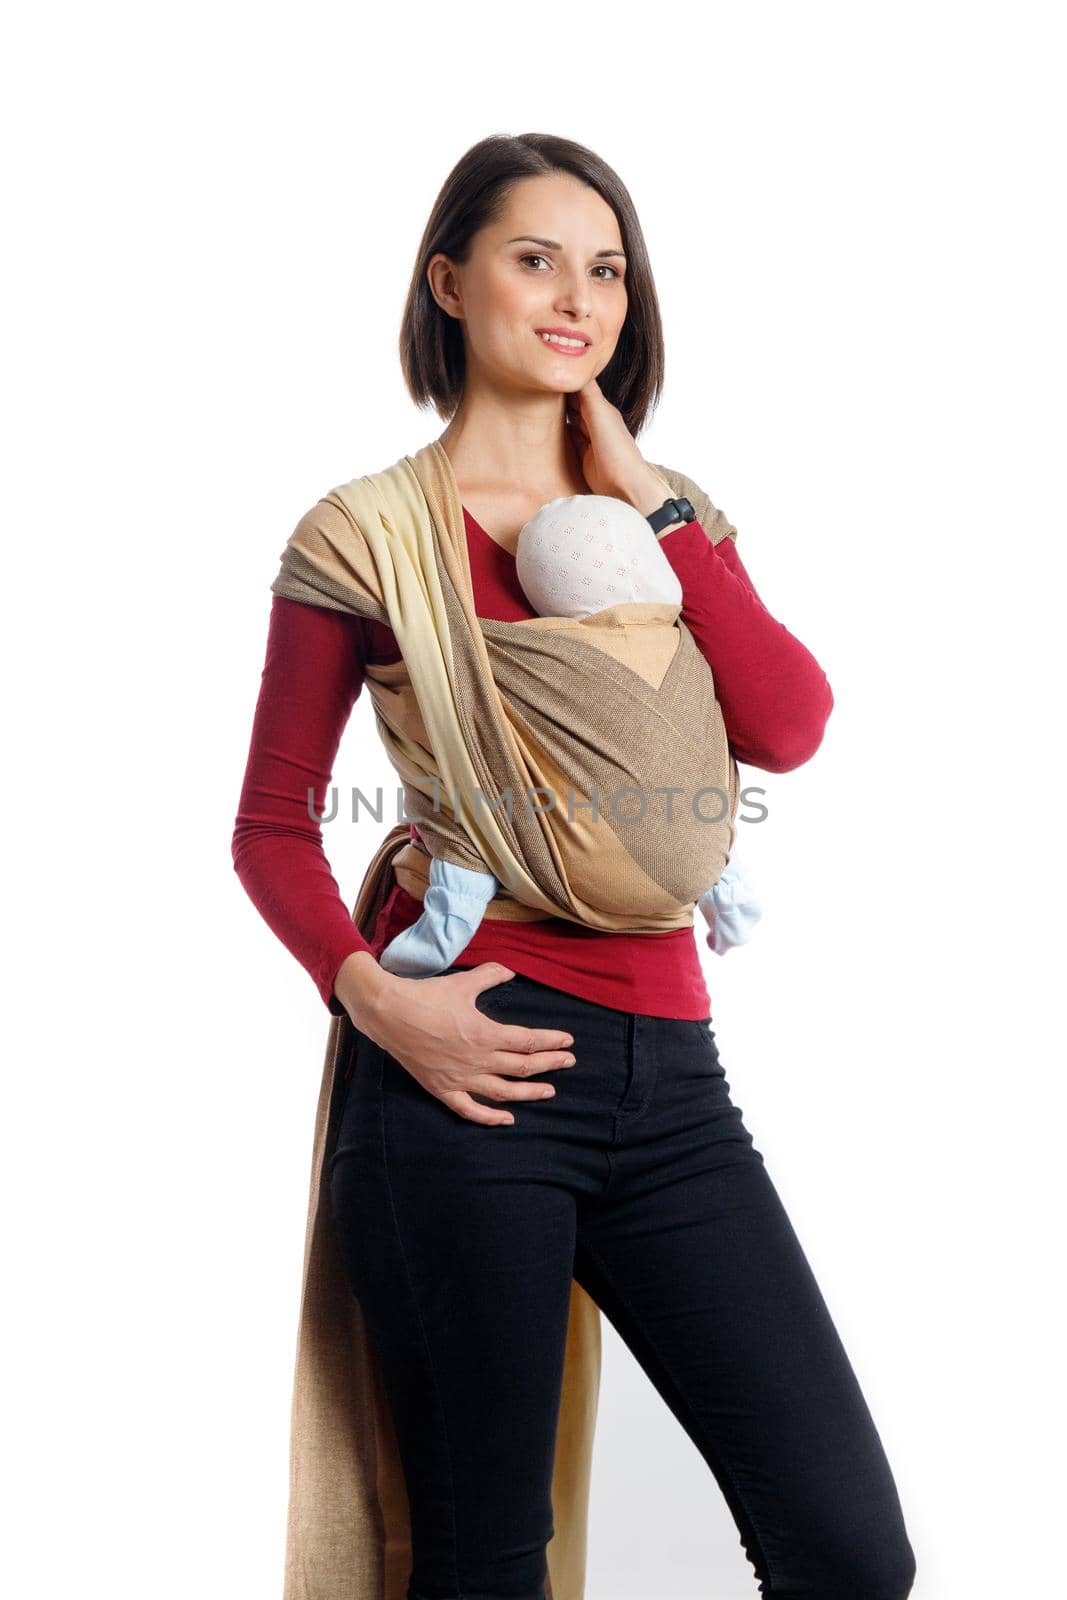 Babywearing attractive young mother with baby in woven wrap carrier. Free hands and active motherhood concept idea. Isolated on white background